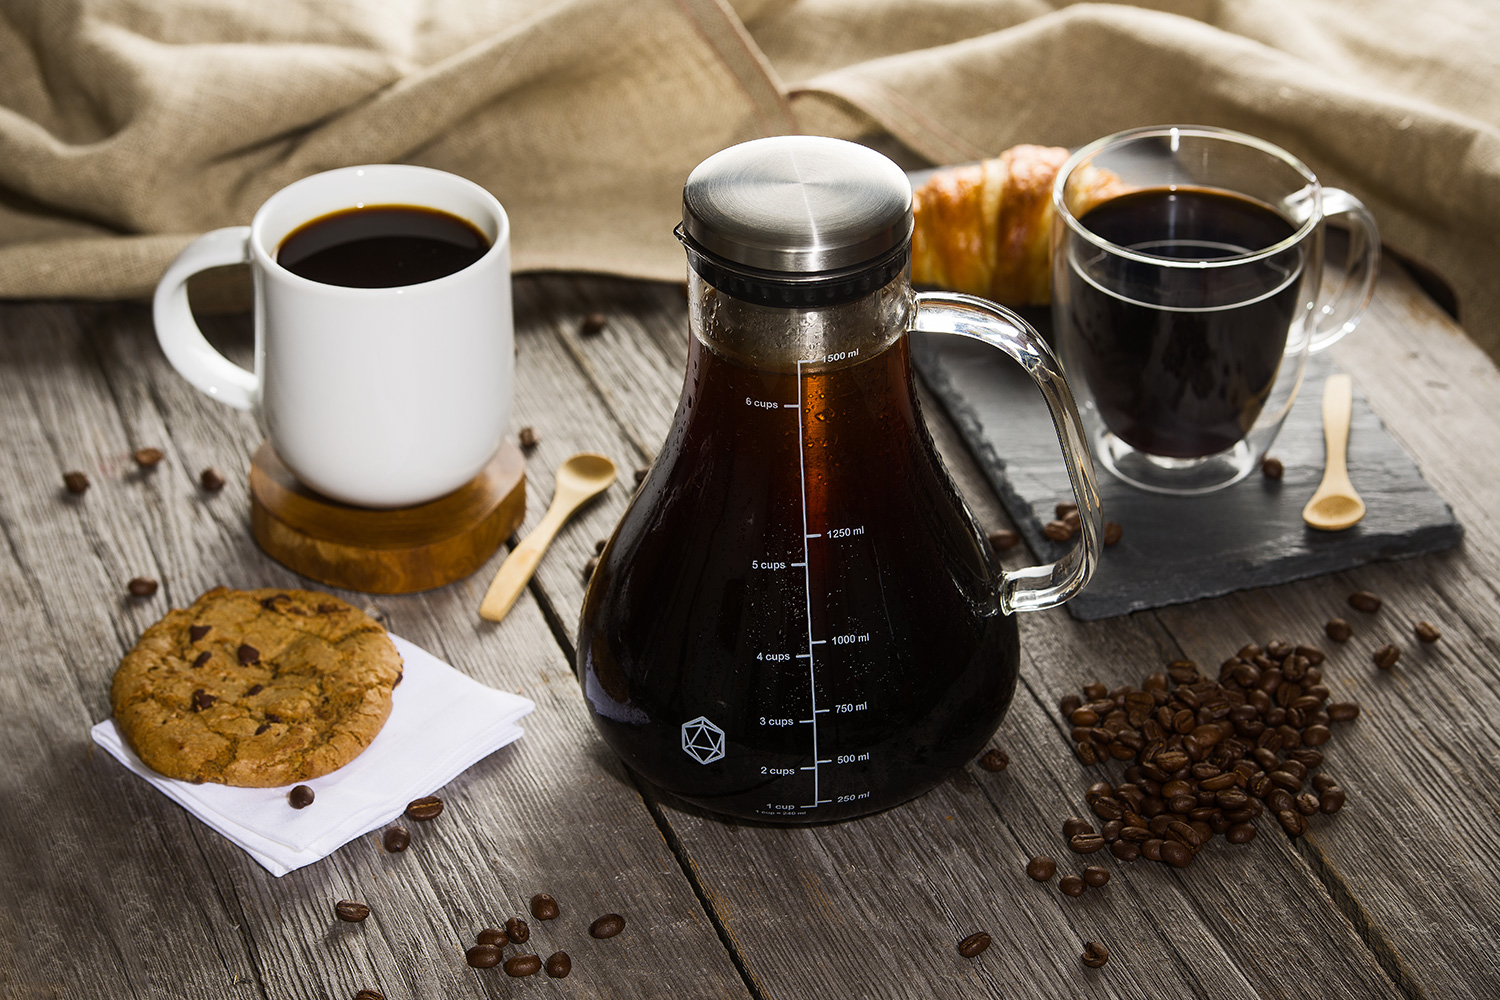 arctic cold brew system launches on kickstarter with hot and